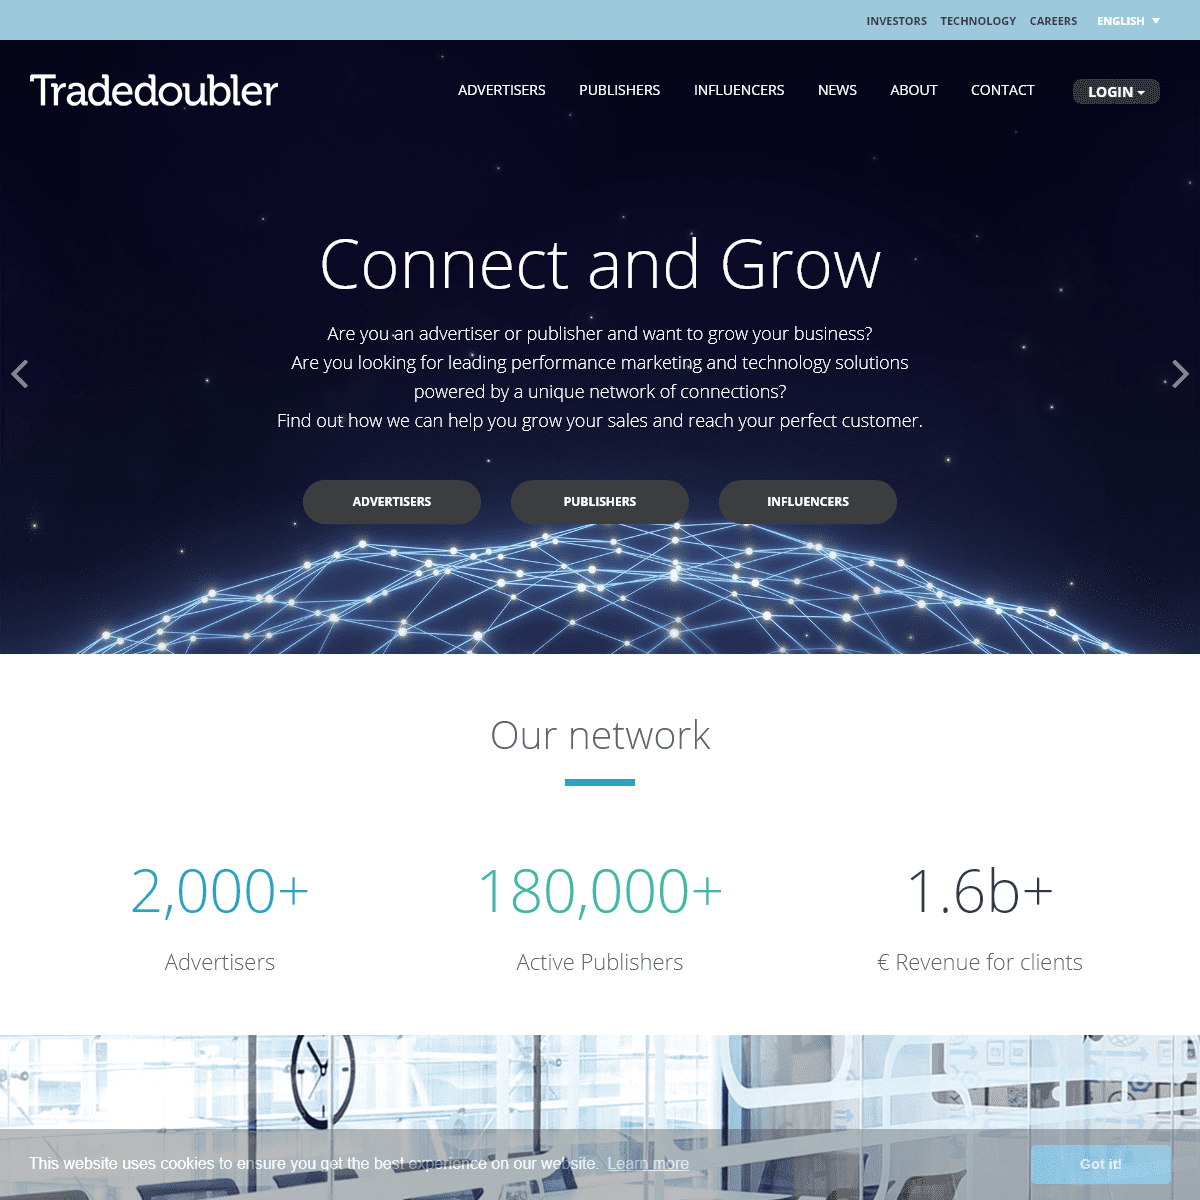 A complete backup of www.new.tradedoubler.com